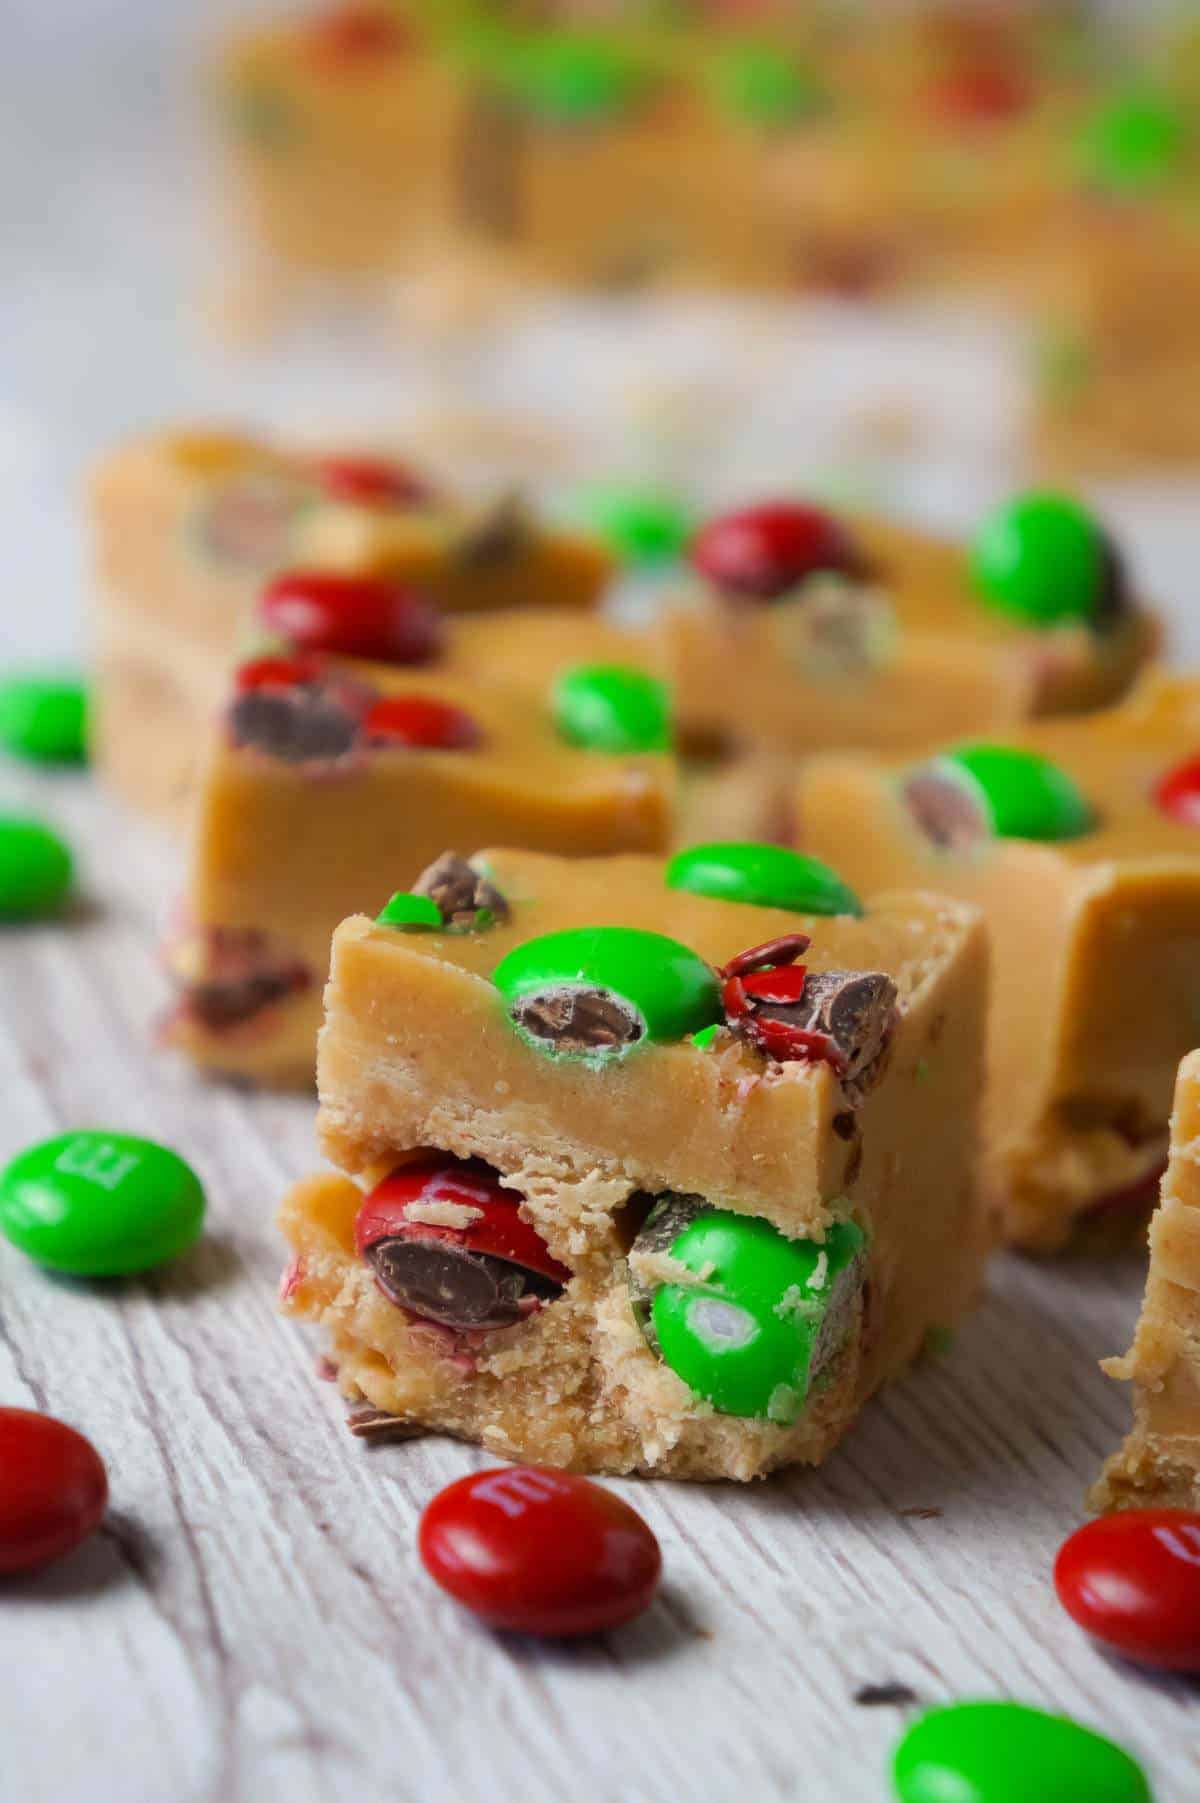 Peanut Butter Christmas Fudge is an easy microwave fudge recipe loaded with festive red and green M&M's.